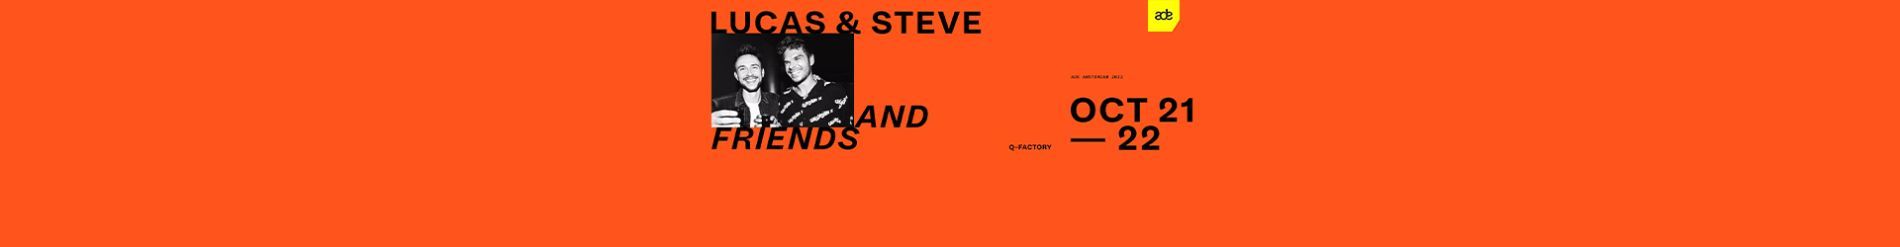 WIN 2 TICKETS TO LUCAS & STEVE'S SHOW AT ADE!